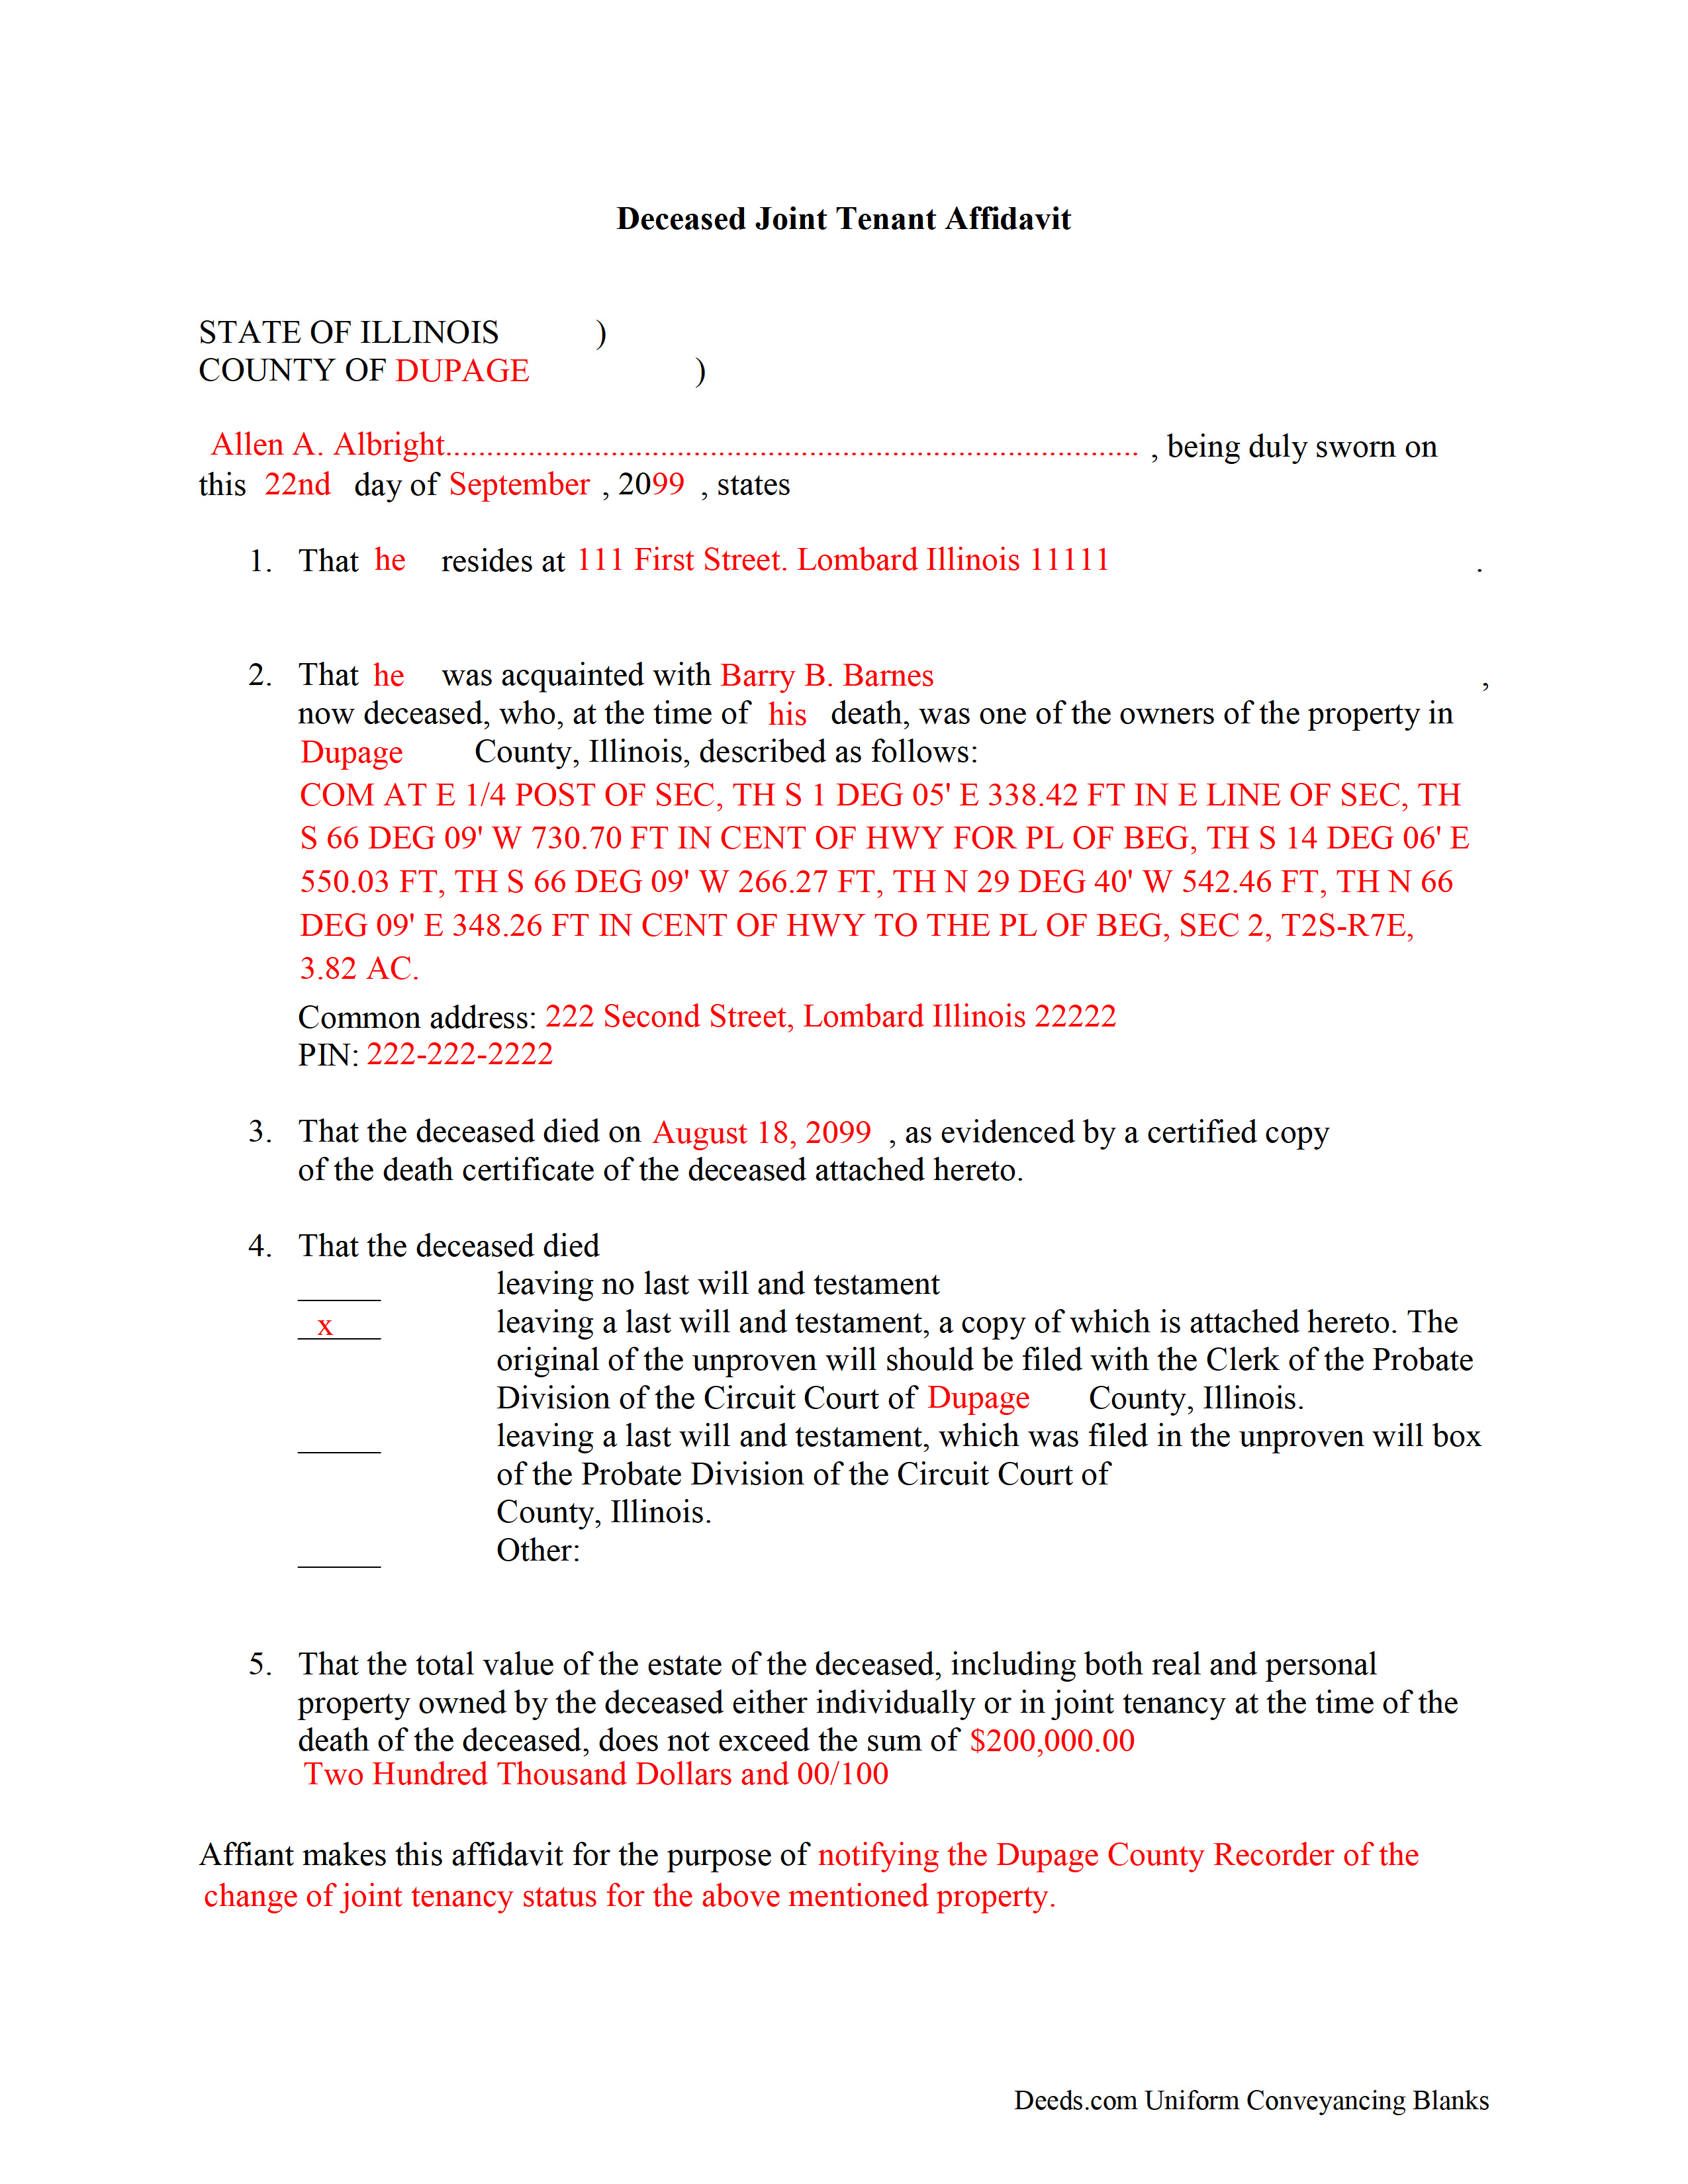 Completed Example of the Deceased Joint Tenant Affidavit Document